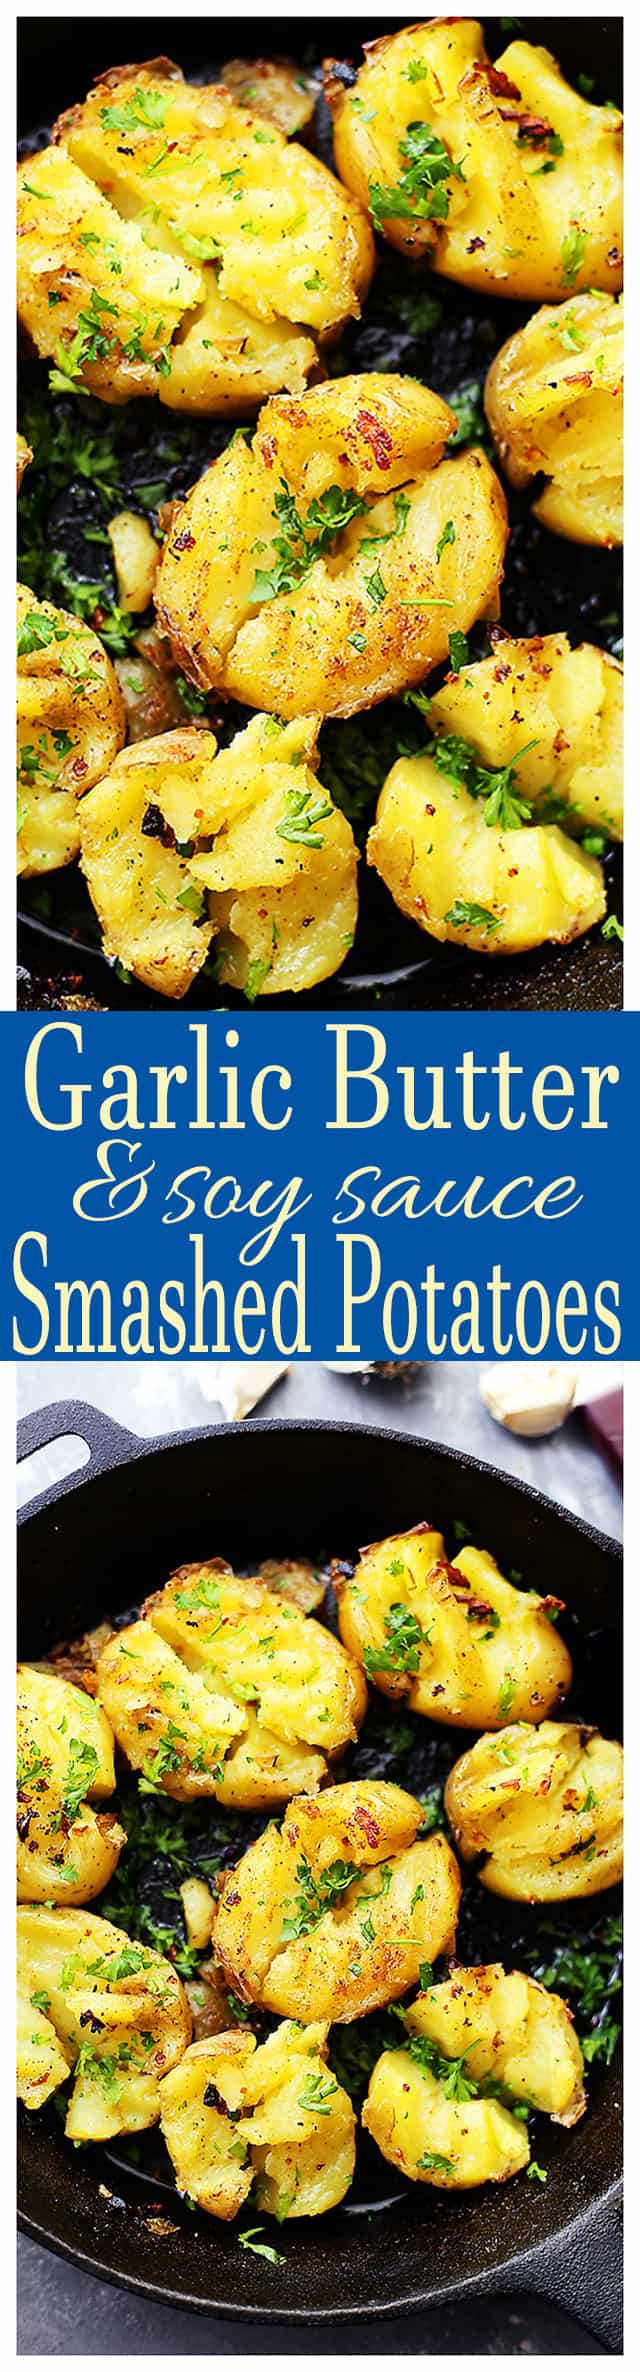 Garlic Butter and Soy Sauce Smashed Potatoes photo collage